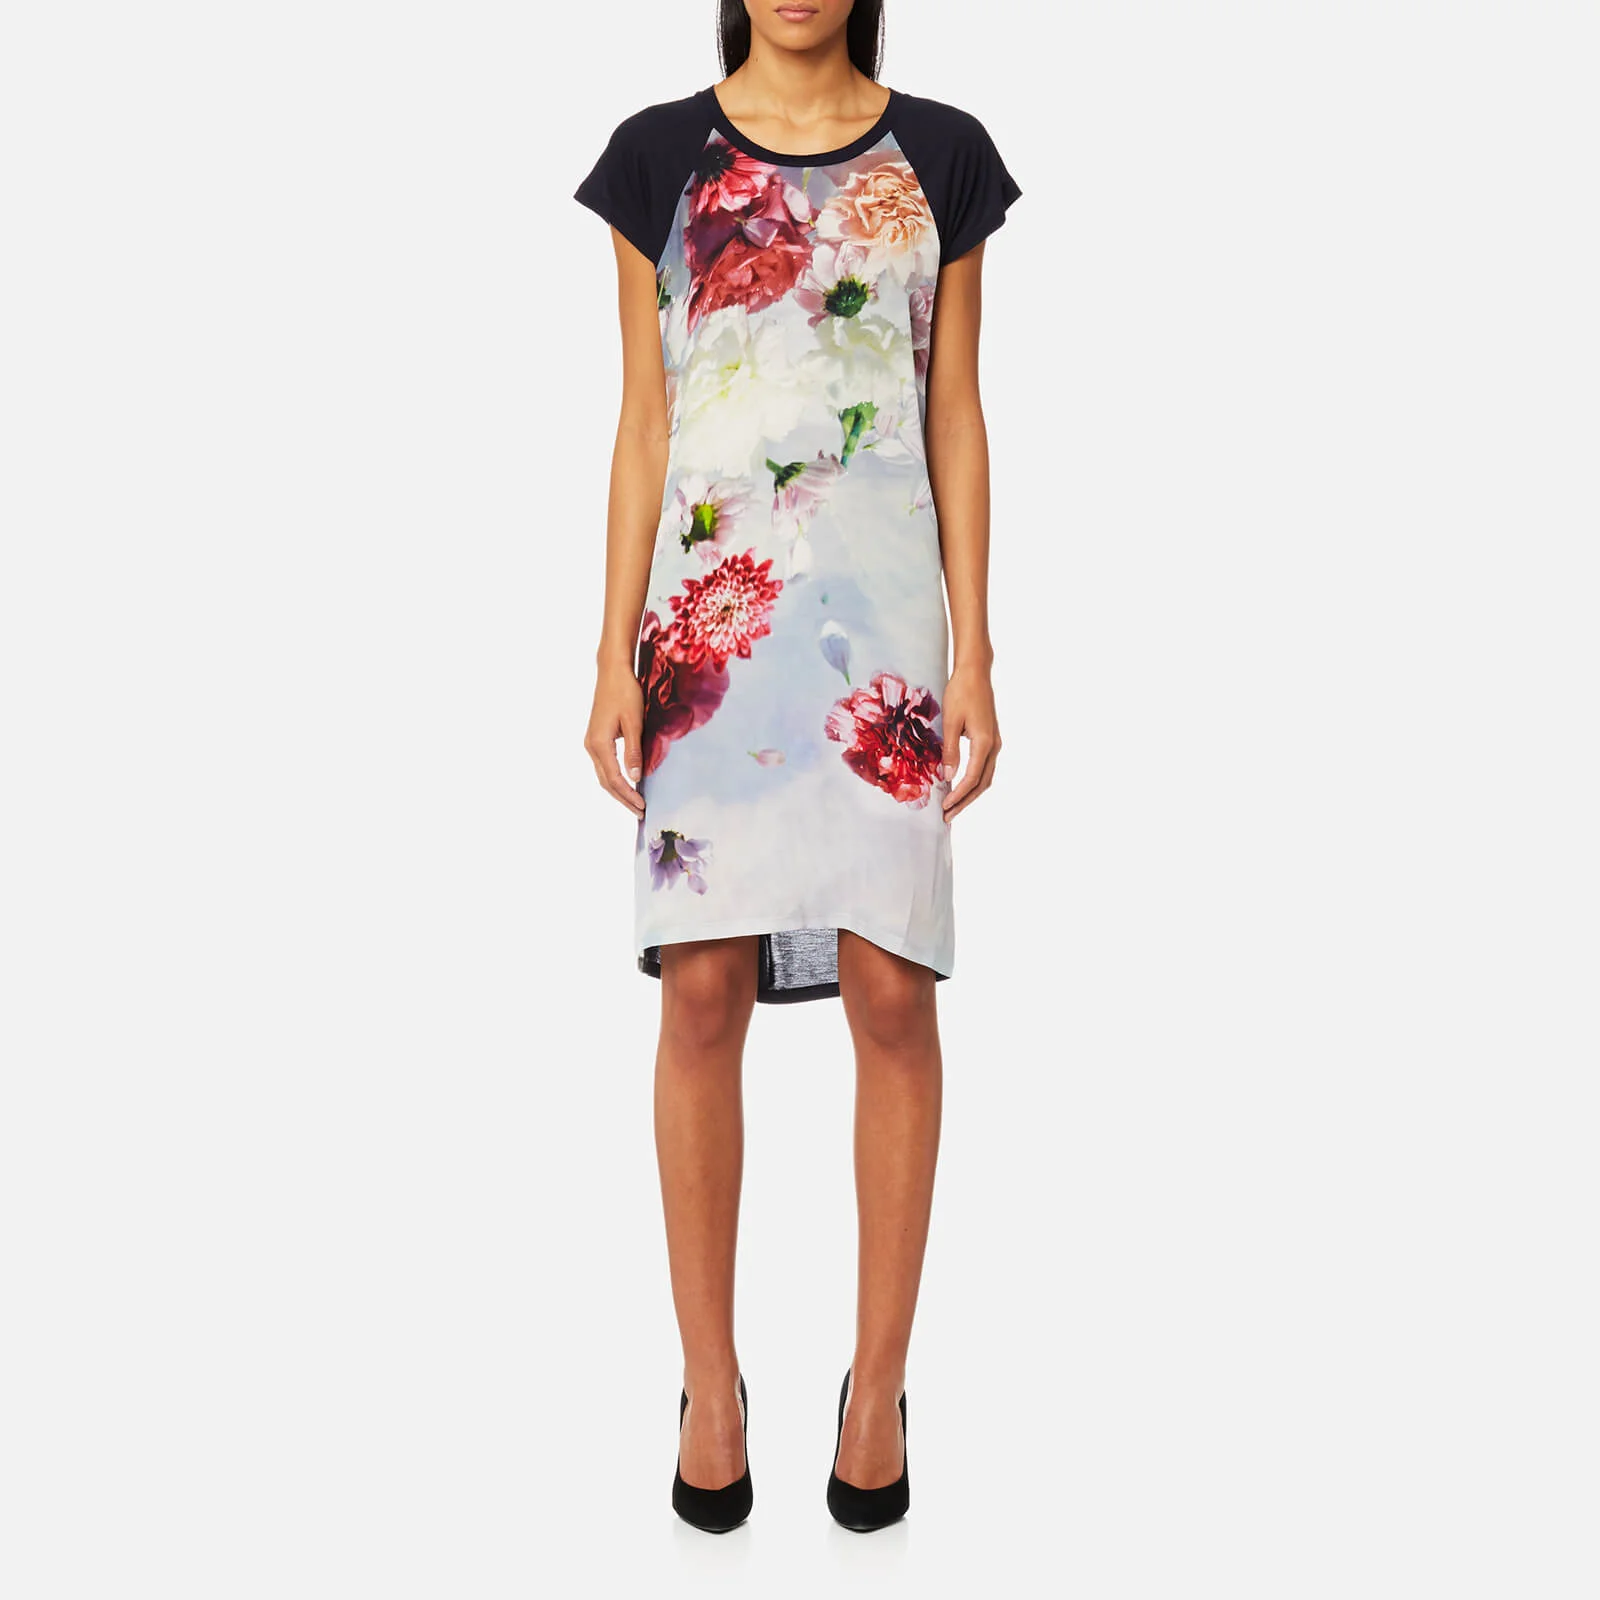 PS by Paul Smith Women's Floral T-Shirt Dress - Black Image 1